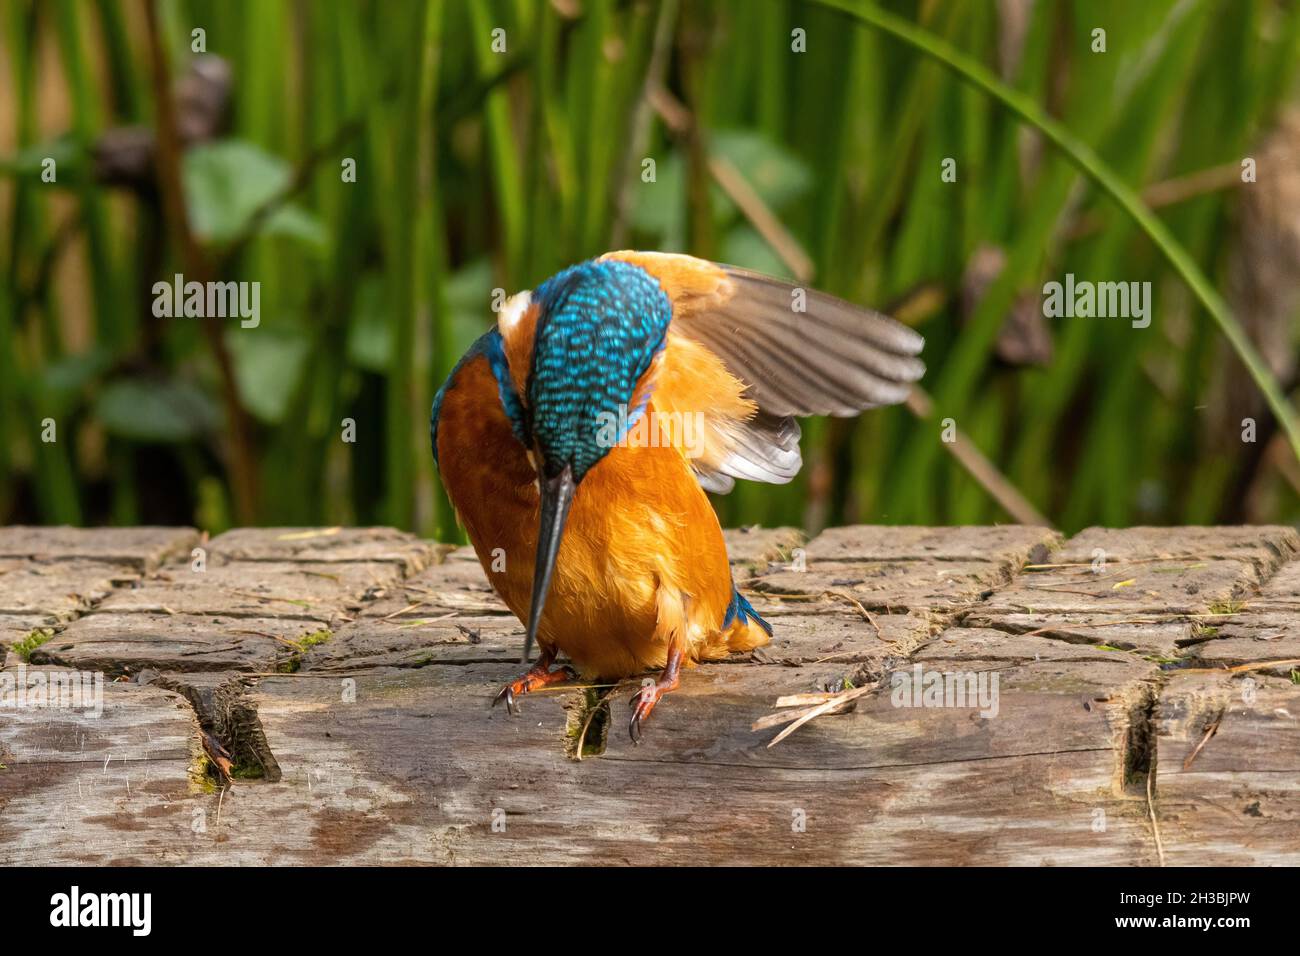 Kingfisher (Alcedo atthis), a colourful british bird, preening itself after a bath, UK Stock Photo